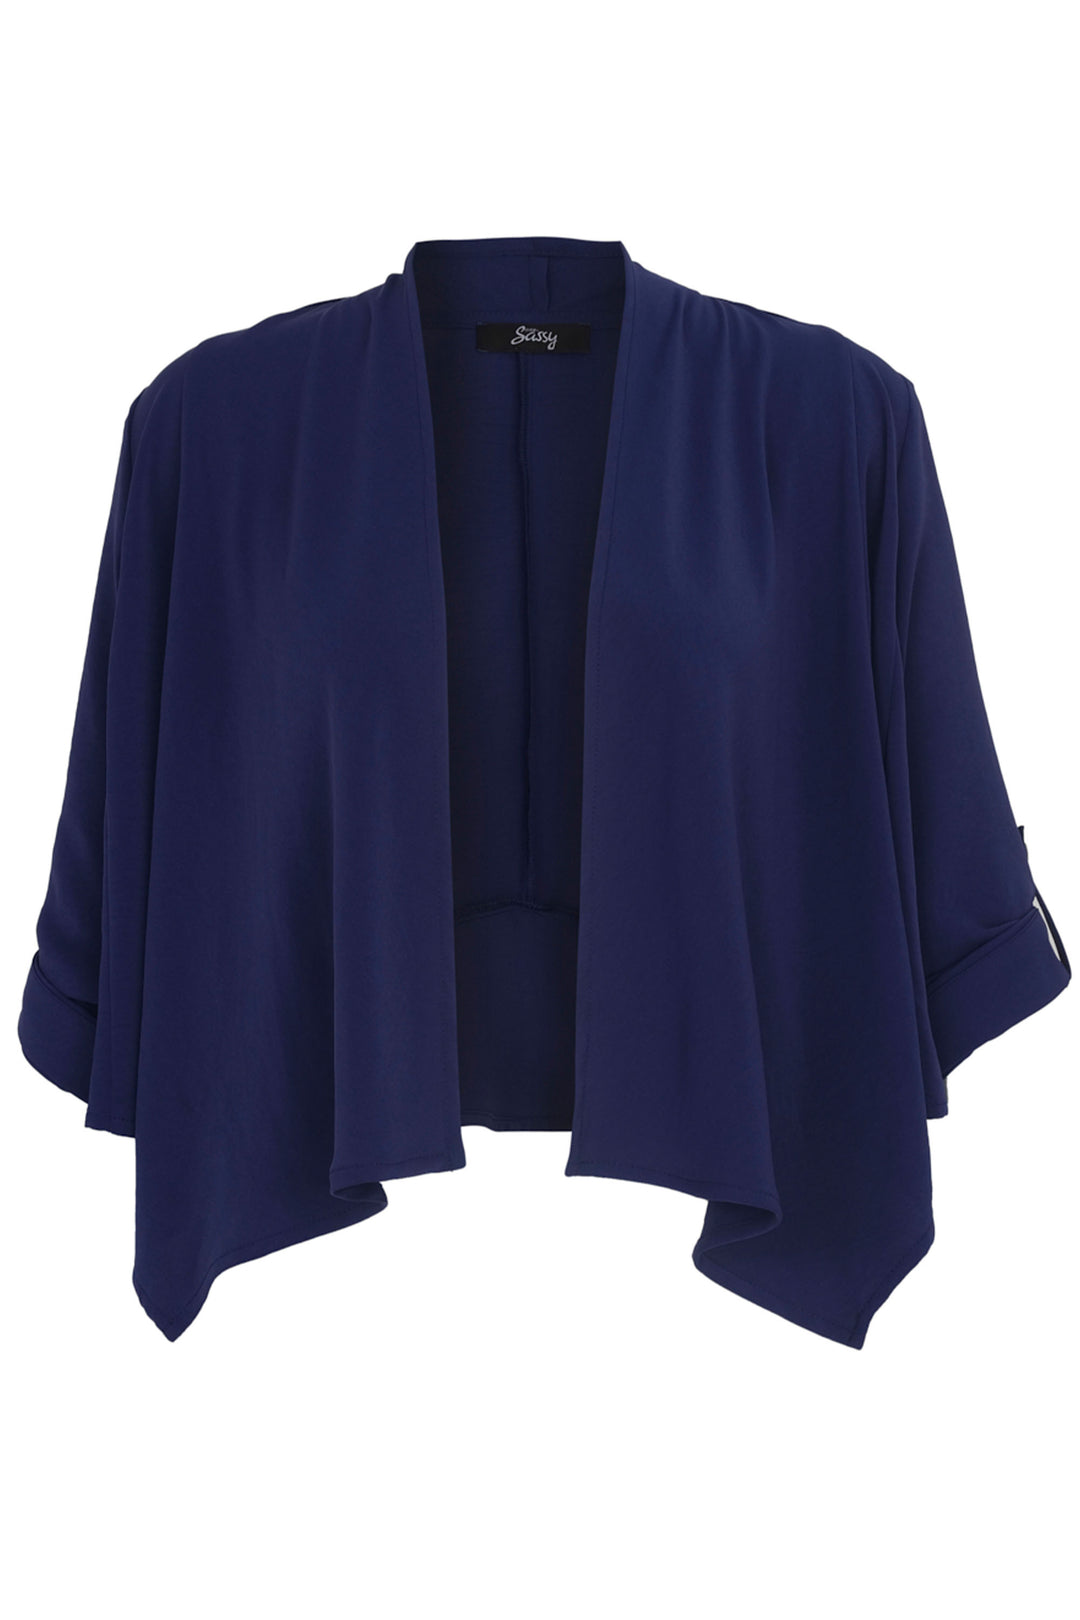 Ever Sassy Spring 2024 SUMMER VIBES NAVY CROP CARDI JACKET, open front style, cardigan, great for layering